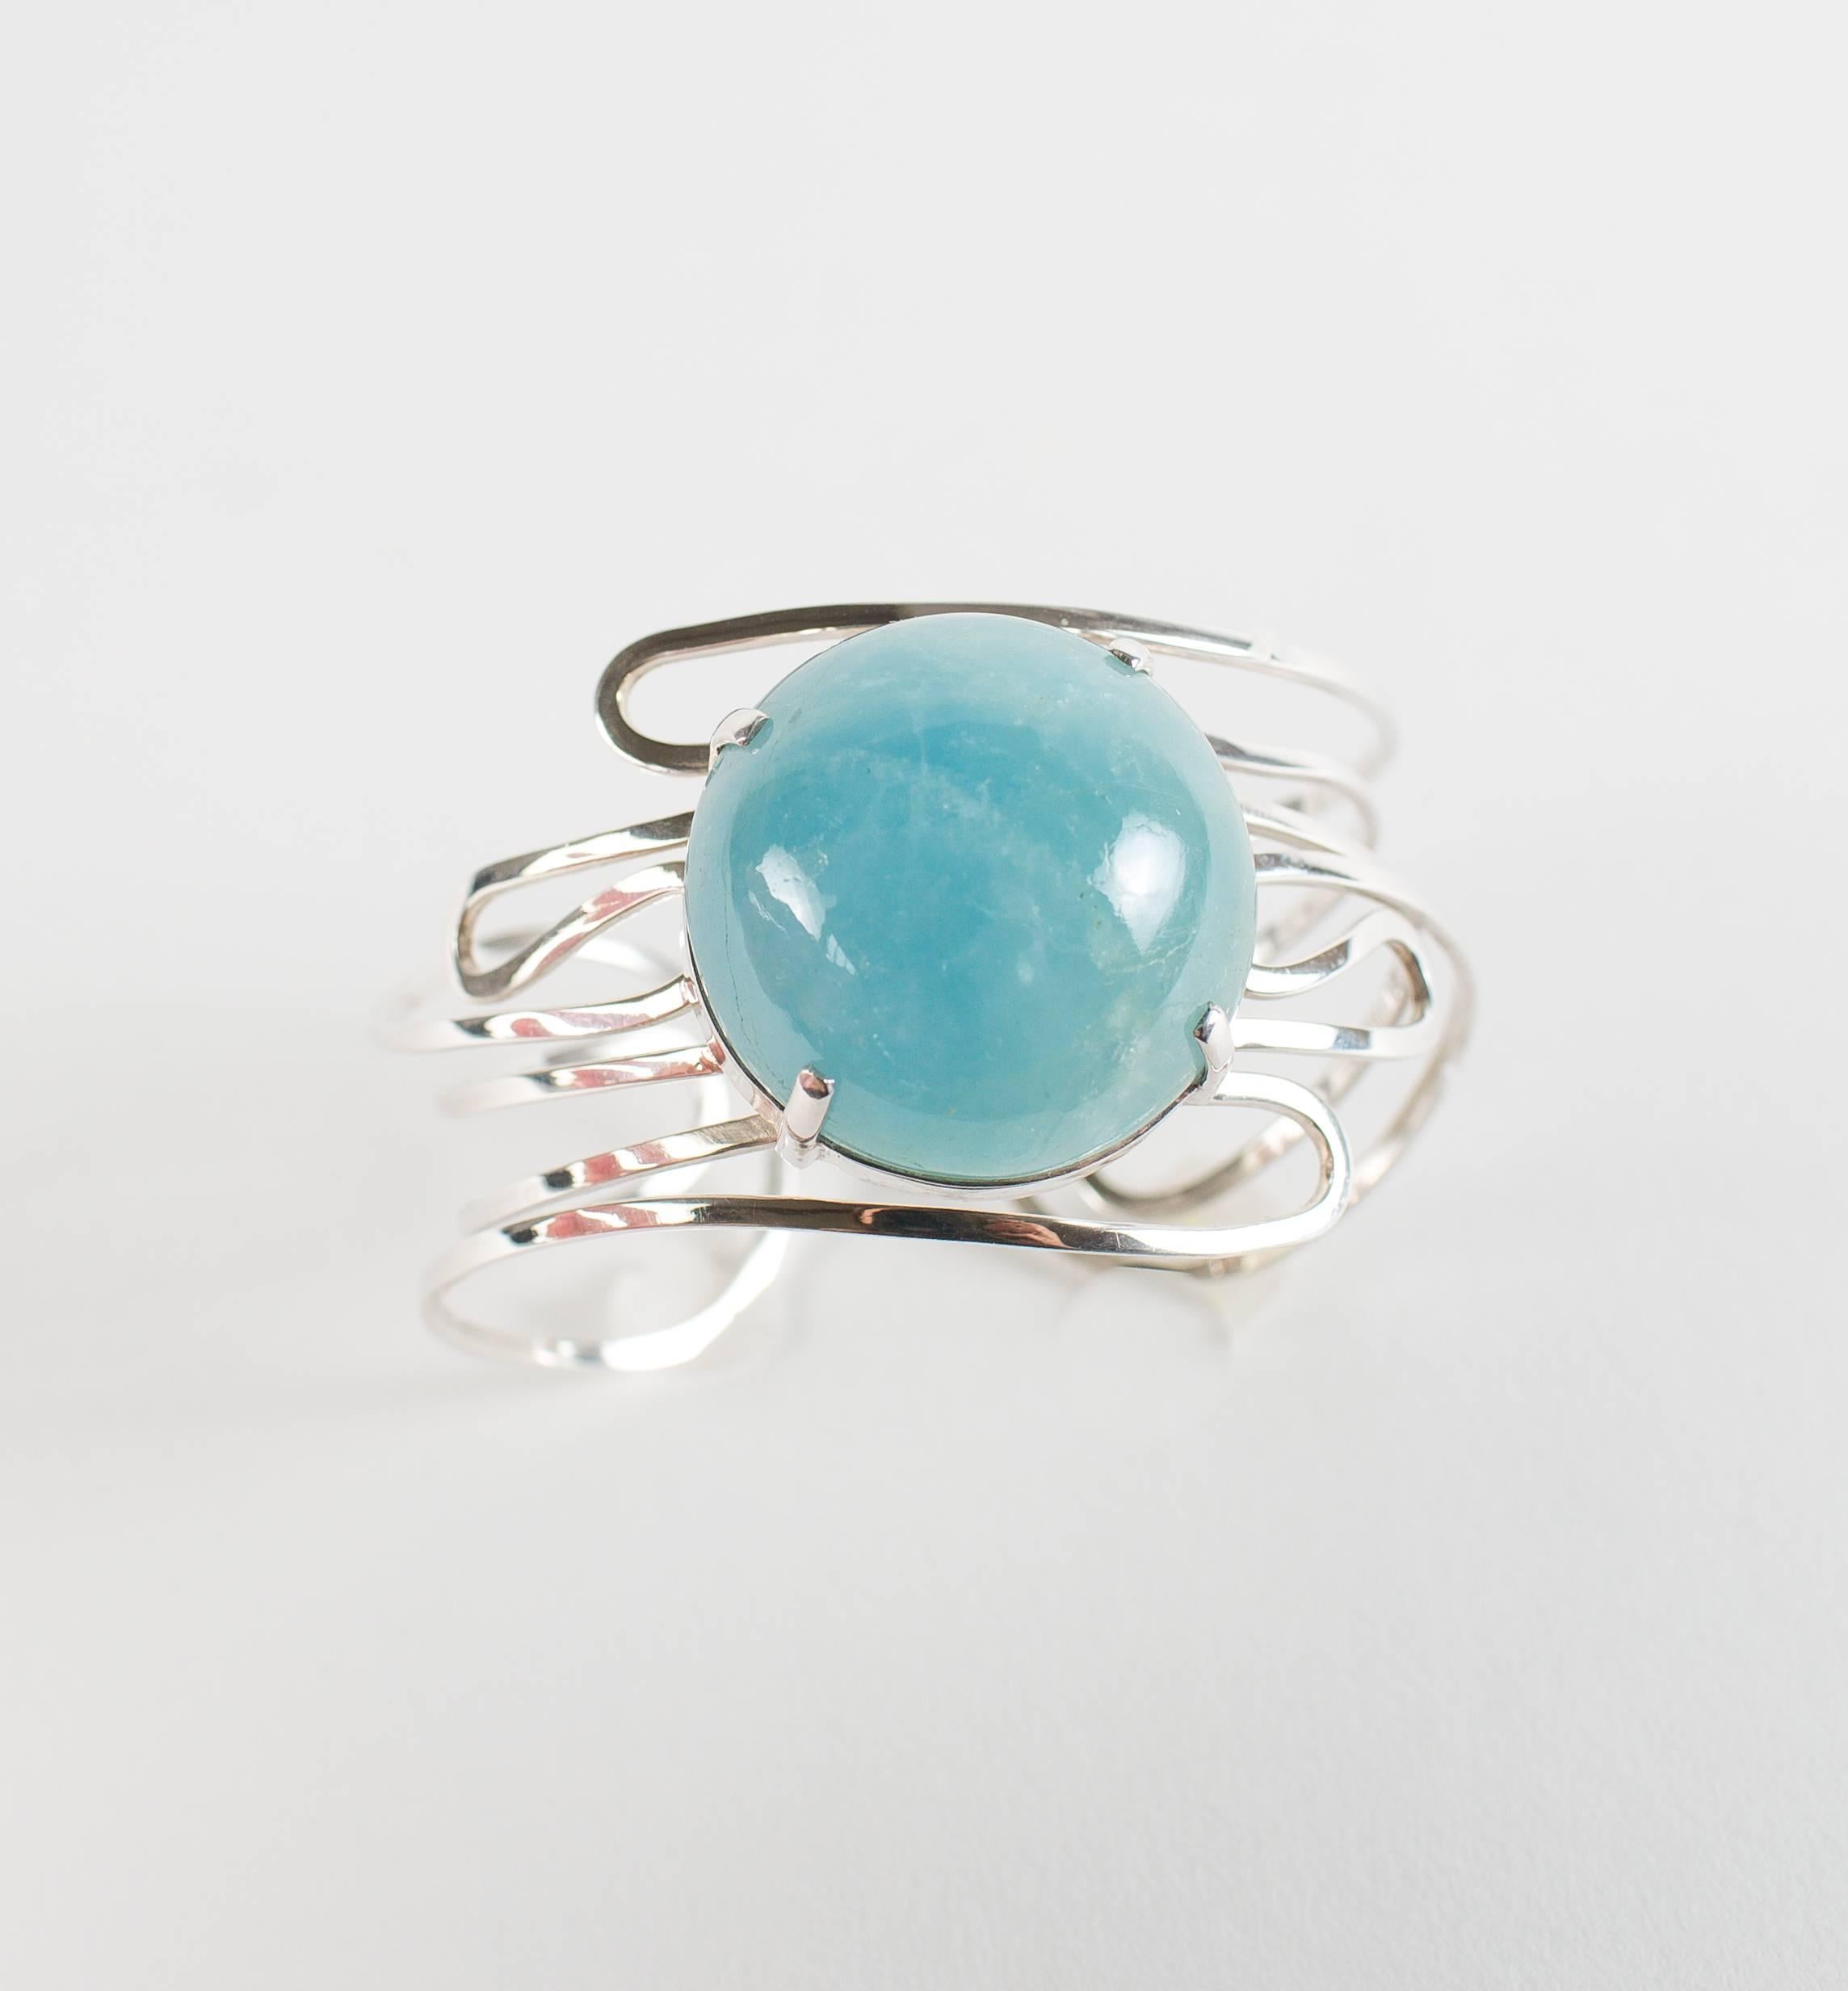 Translucent 102 carat round cabochon aquamarine set in swirls of Sterling Silver handmade Bracelet.  This beautiful bracelet will embrace your wrist and enhance your every ensemble.  The lovely sea blue Aquamarine cabochon is 1 3/16 inches in